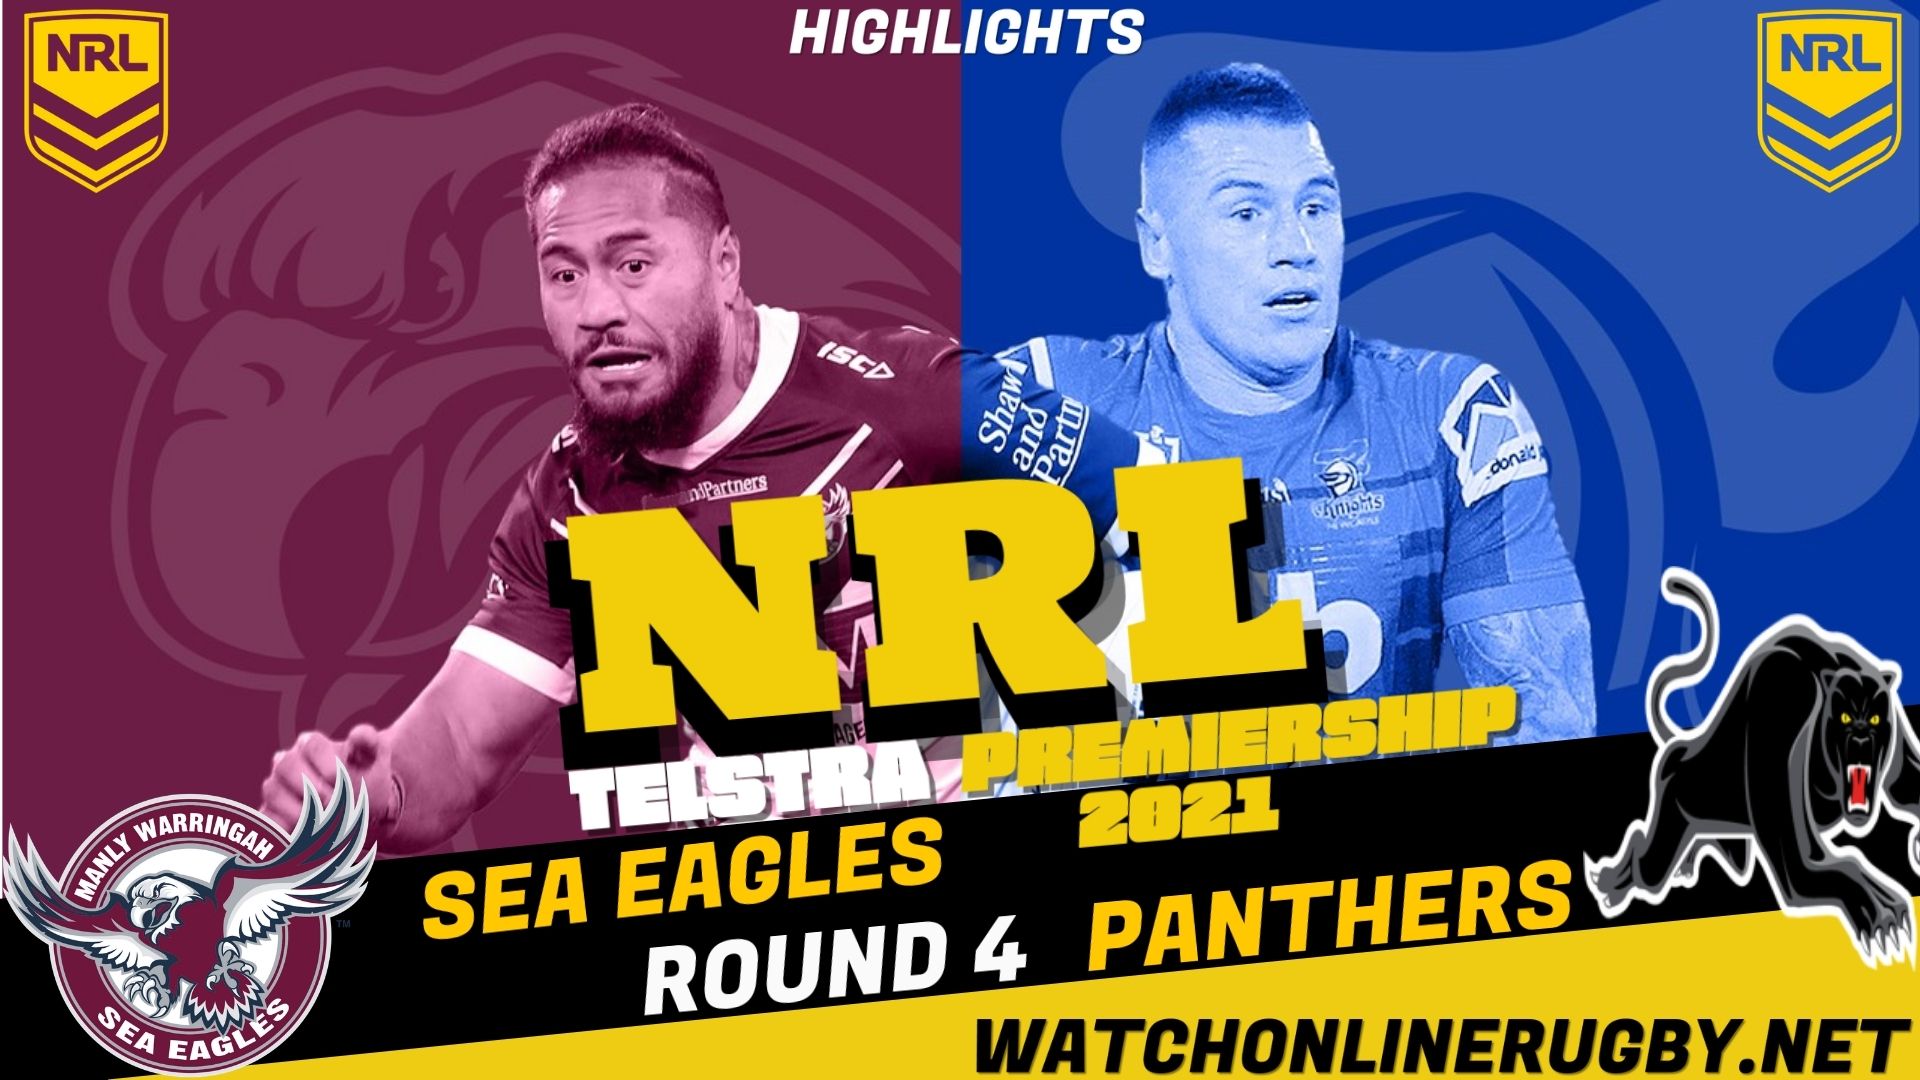 Sea Eagles Vs Panthers Highlights RD 4 NRL Rugby